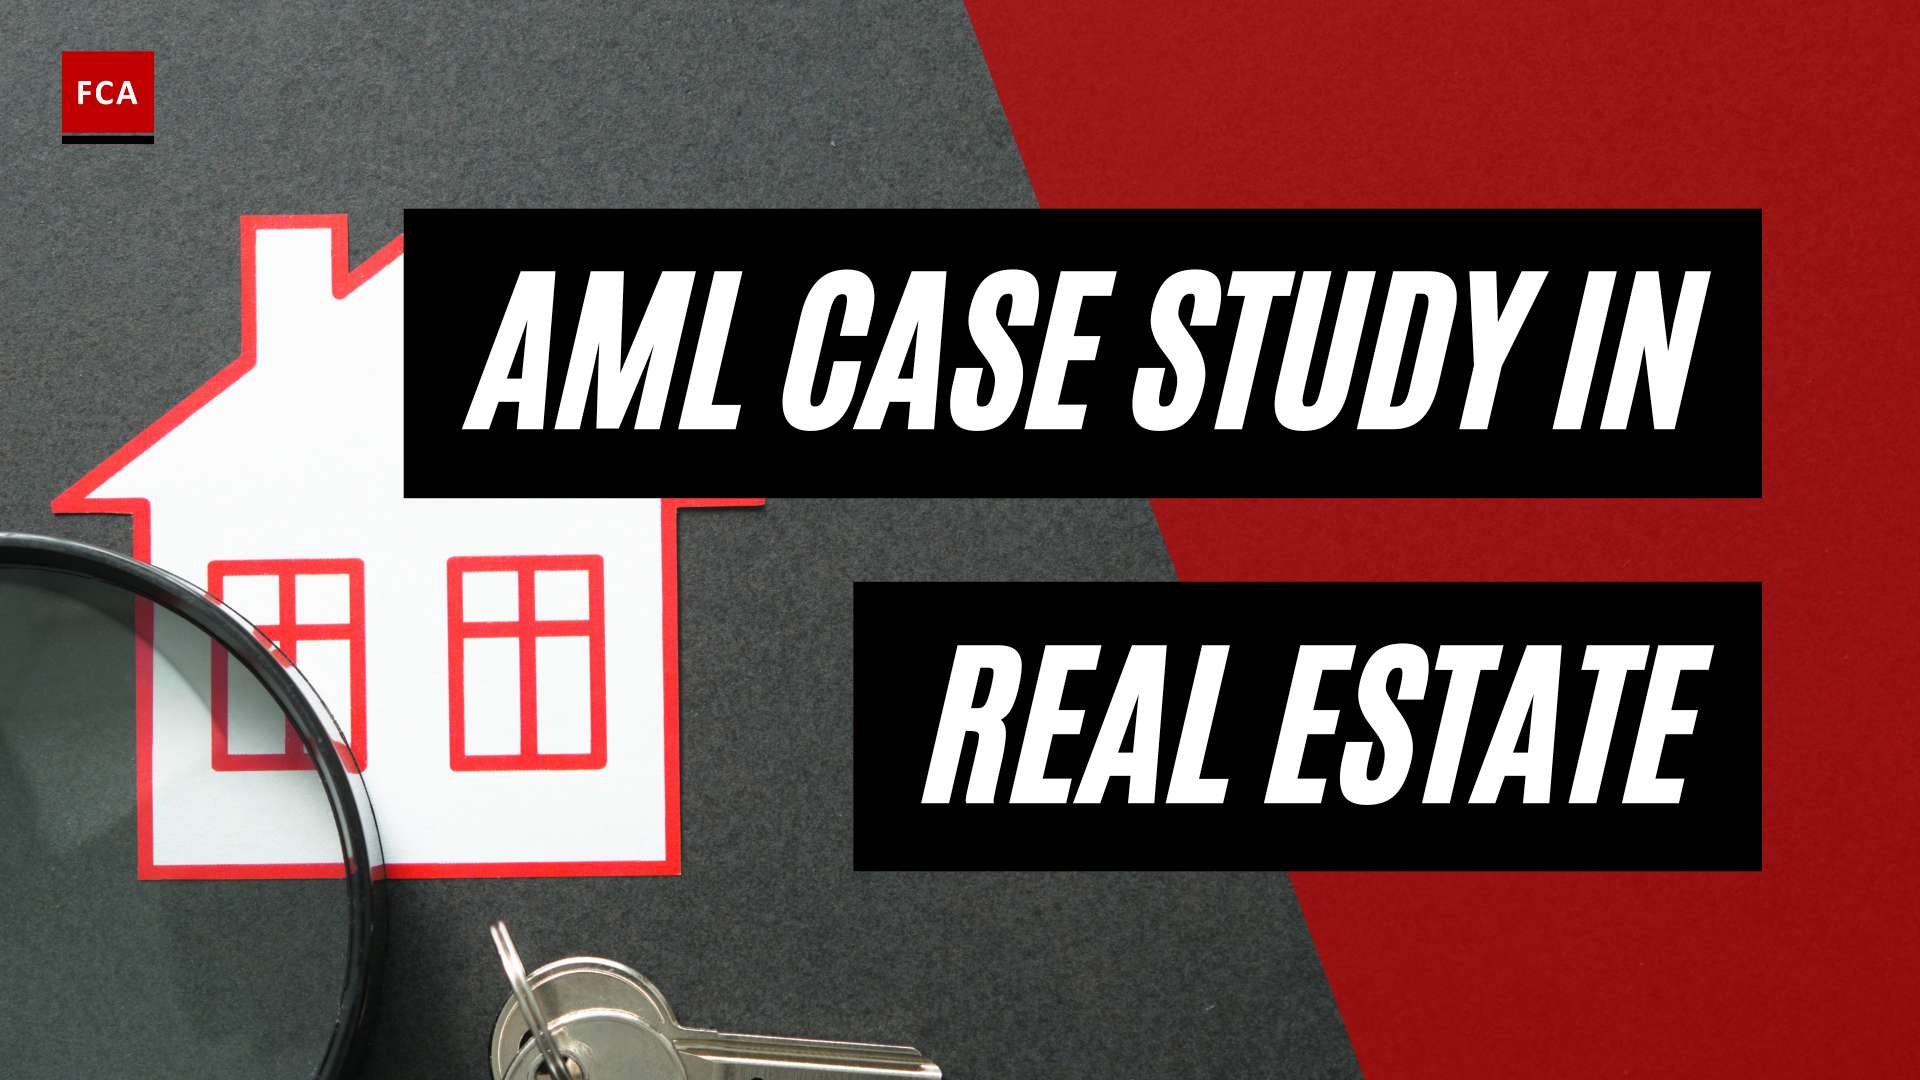 Real-Life Lessons: Aml Case Studies In The Real Estate Industry